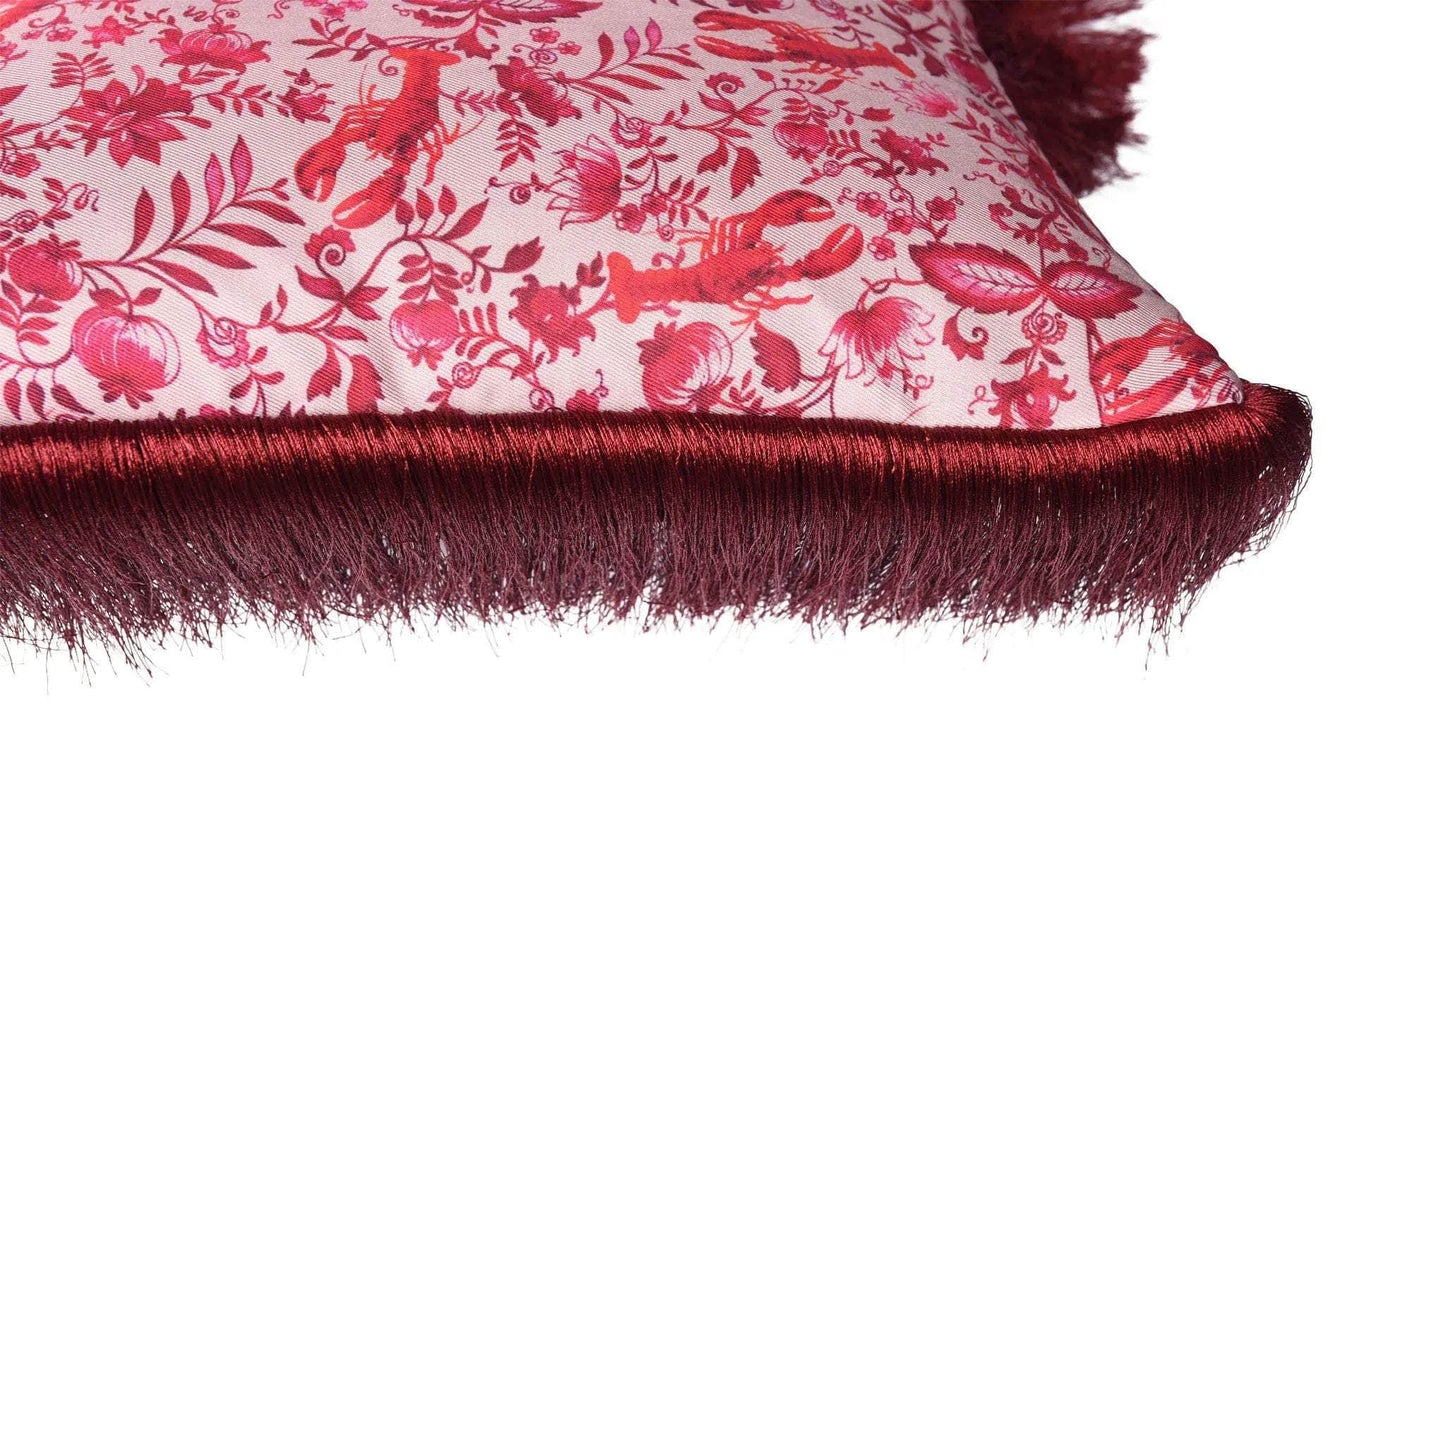 Mulberry silk twill and velvet red lobster-print cushion with fringes